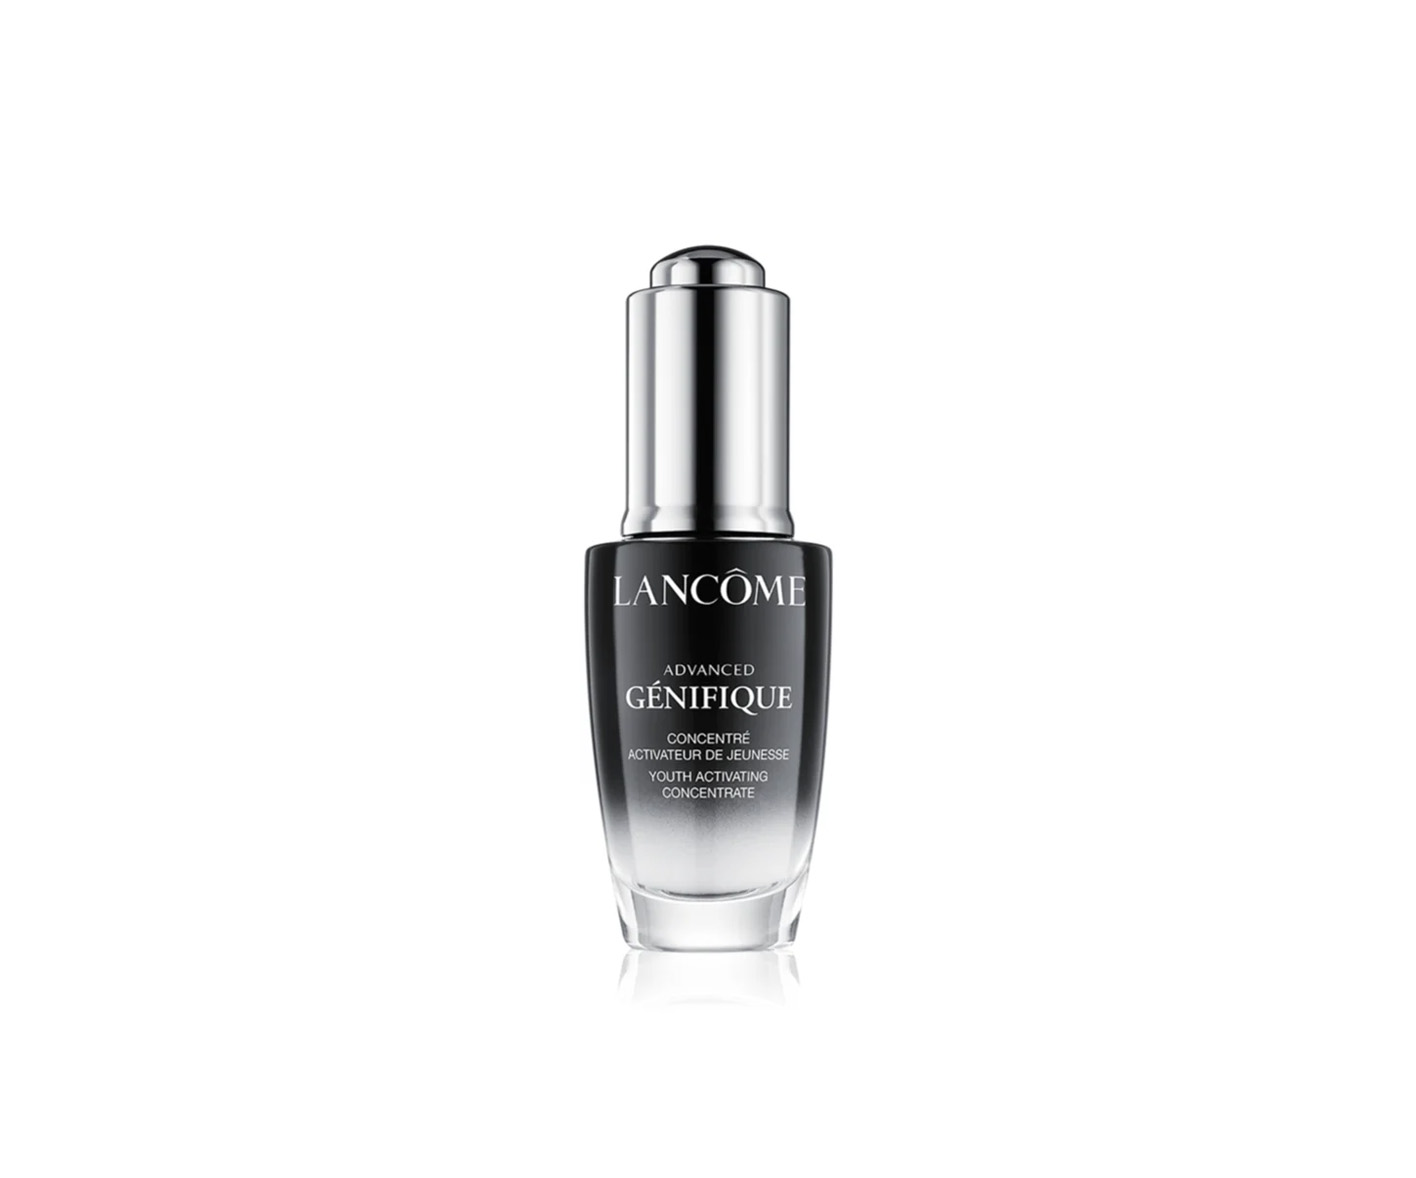 Lancome, Advanced Génifique, Youth Activating Serum, Smoothing Serum